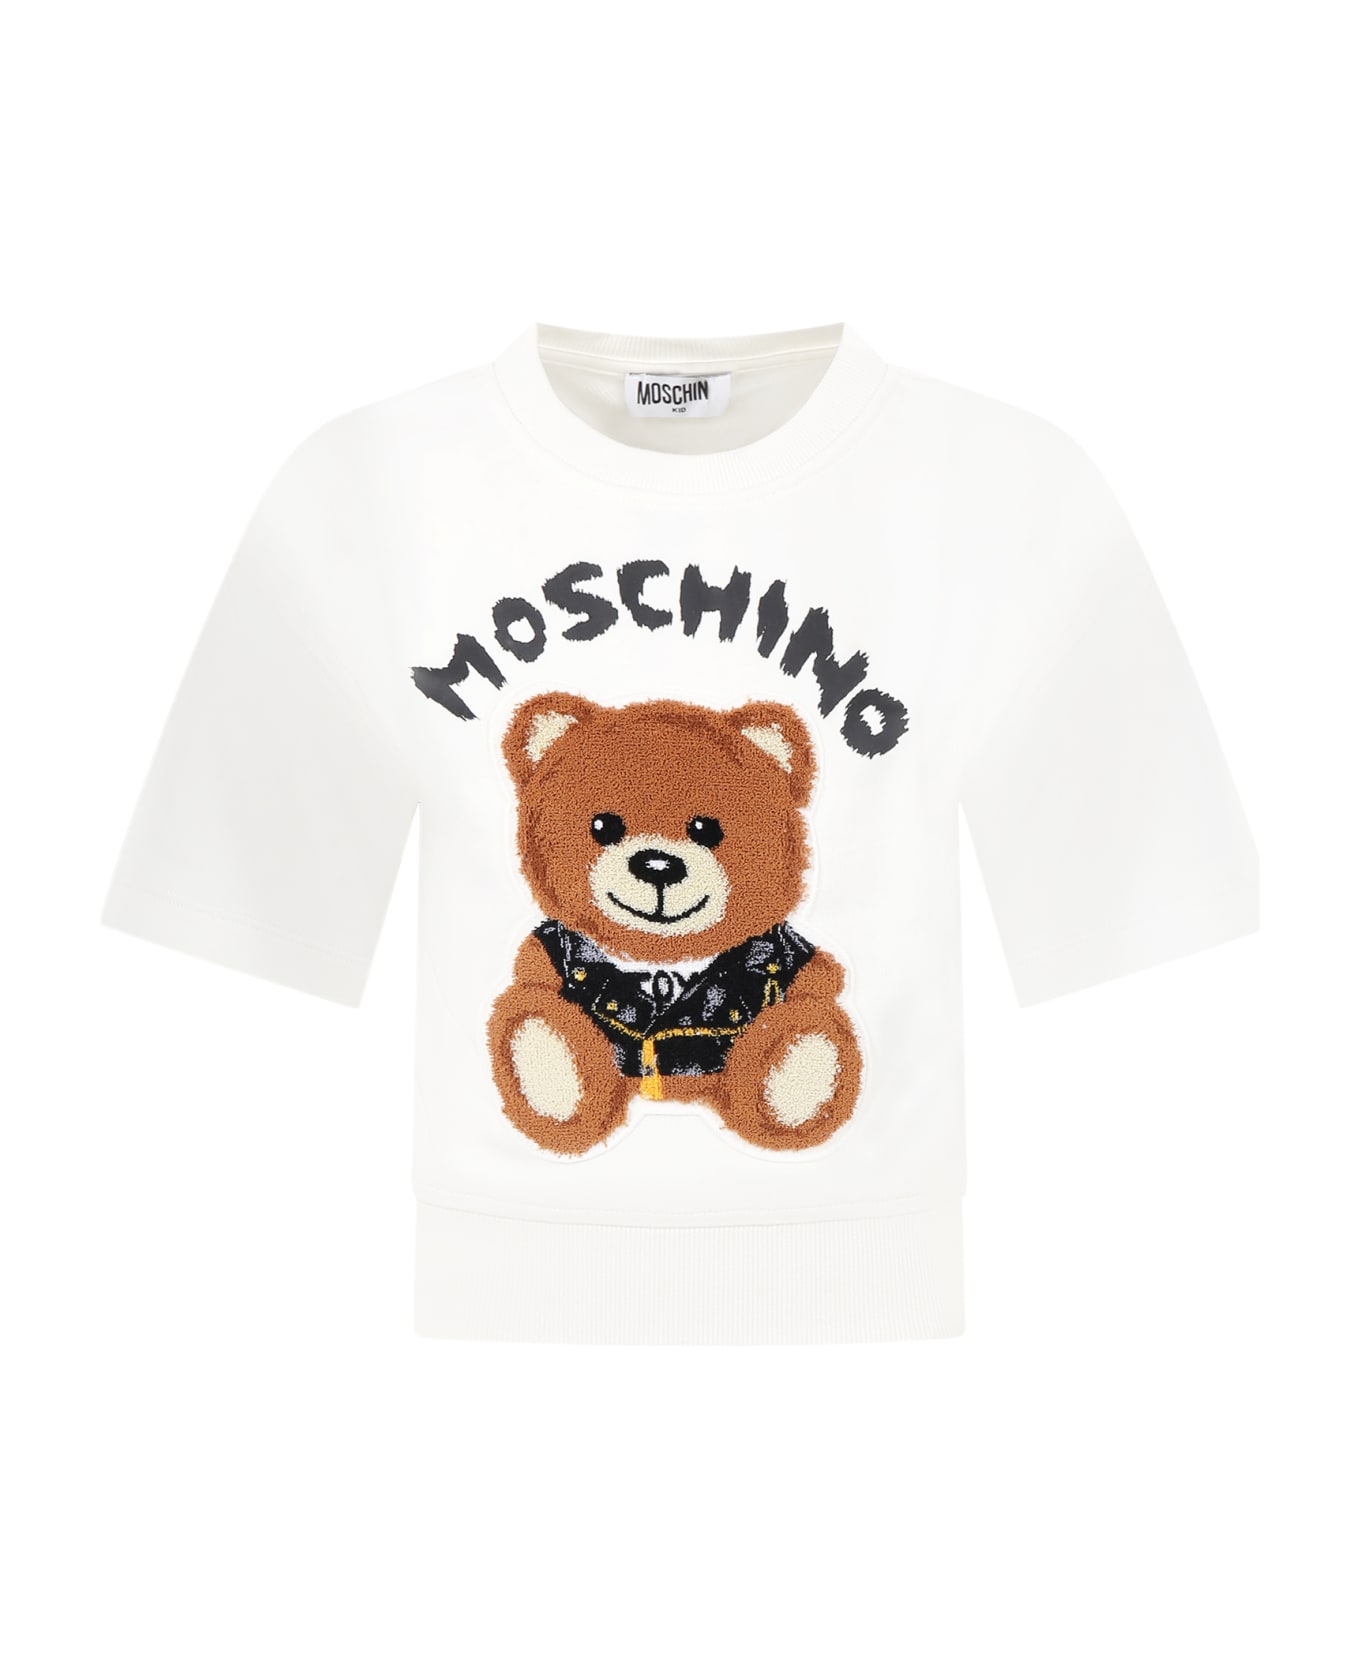 Moschino White Sweatshirt For Kids With Teddy Bear And Logo - White